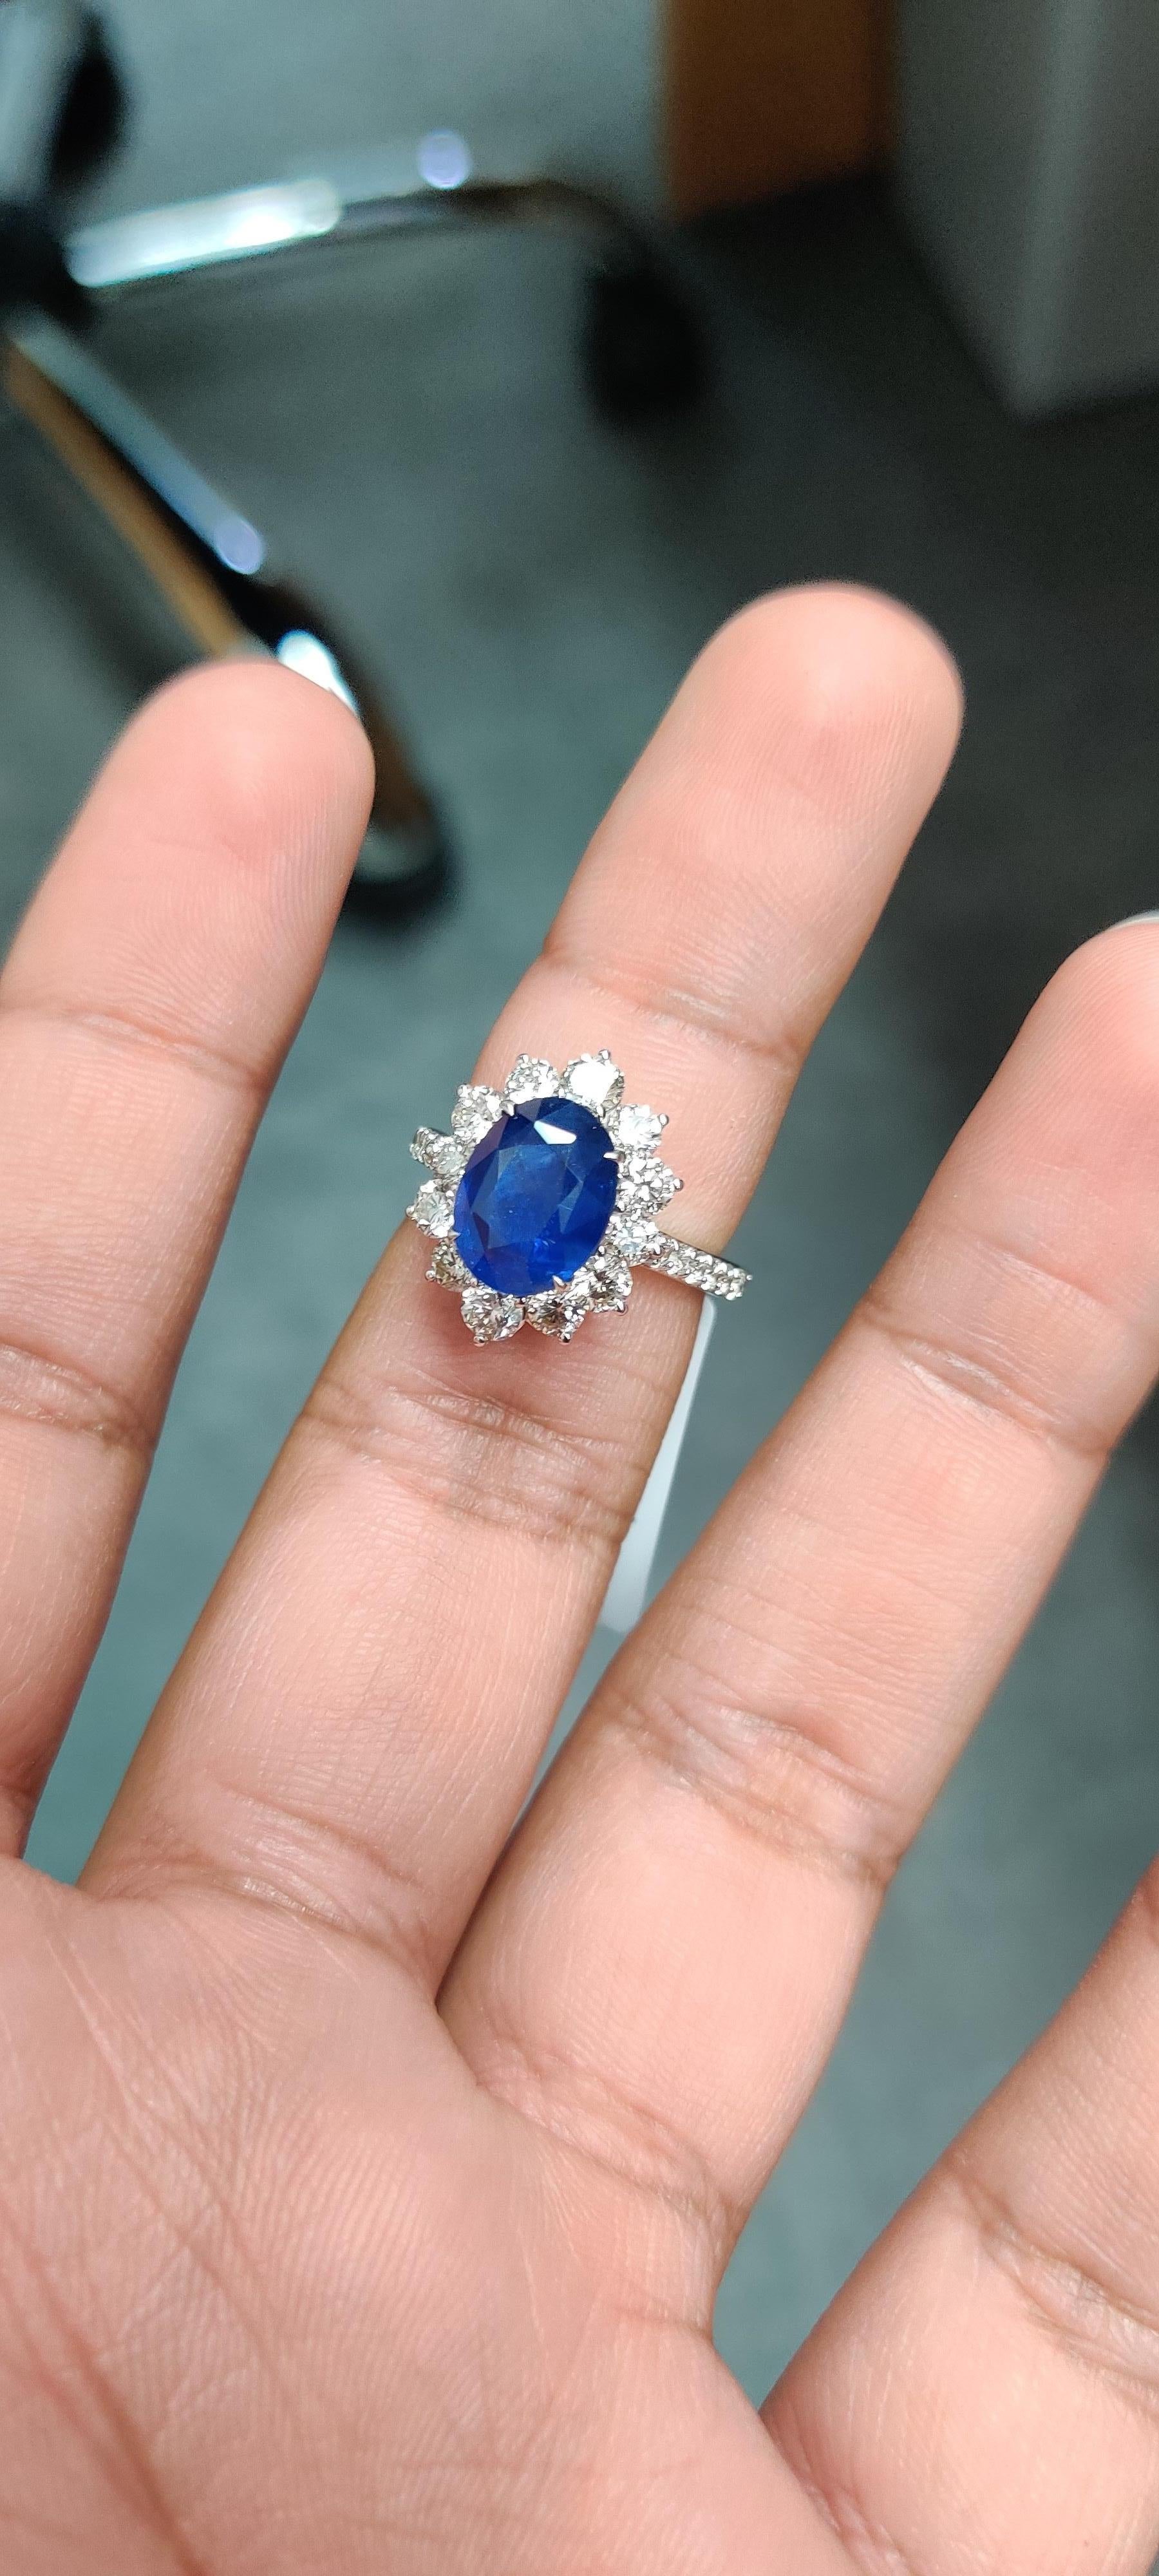 4.19 Carat Sapphire Diamond Cocktail Ring For Sale 4